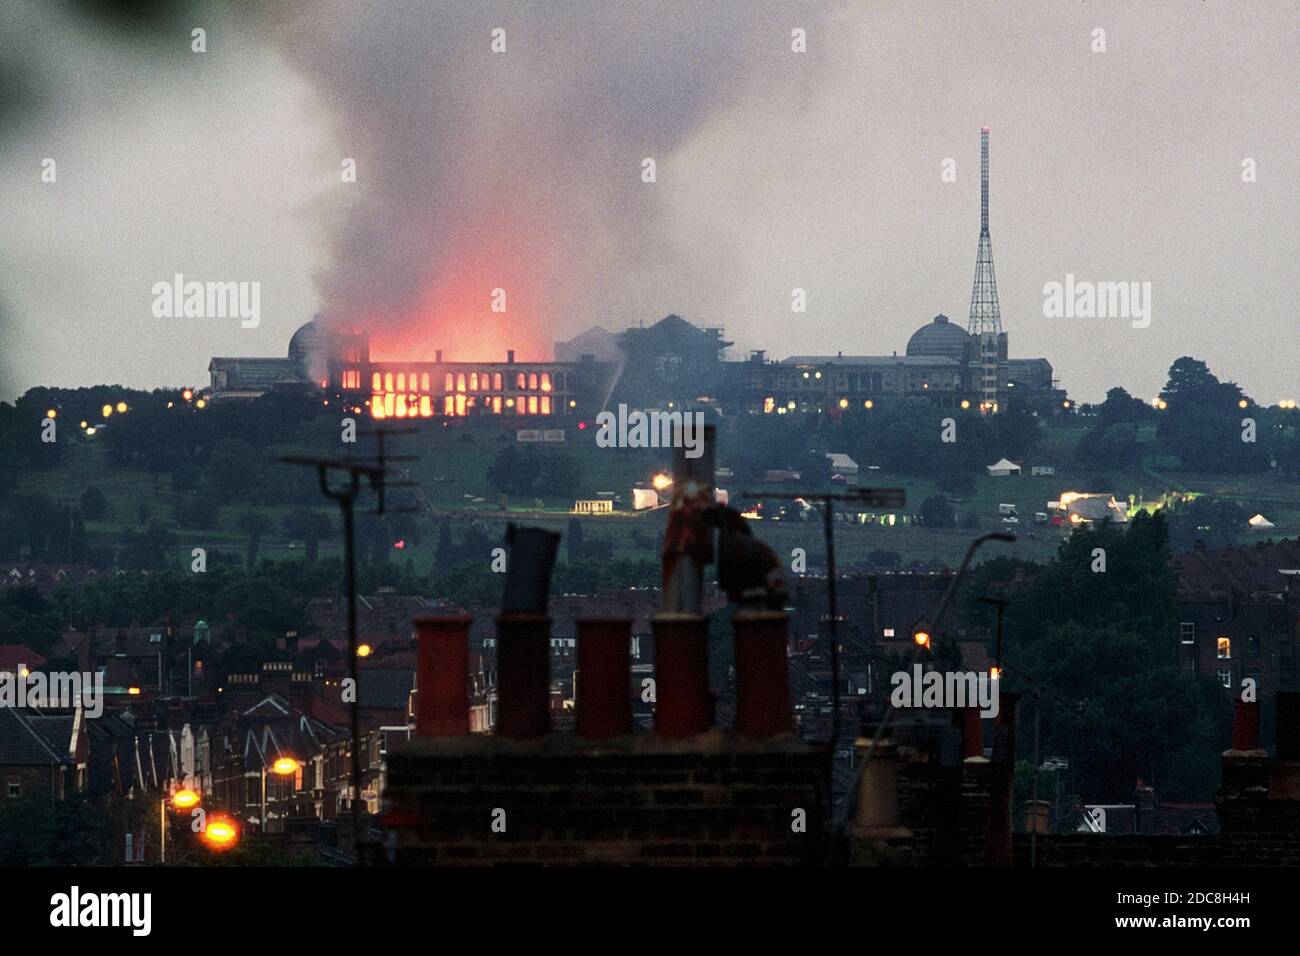 UK, London, Hornsey/Muswell Hill, N22 7AY Alexandra Palace was partially destroyed by fire (for the second time) on the 10th July 1980 during Capital Radio's Jazz Festival. The photo was taken from the top of Nelson Rd, looking across Hornsey Vale Stock Photo